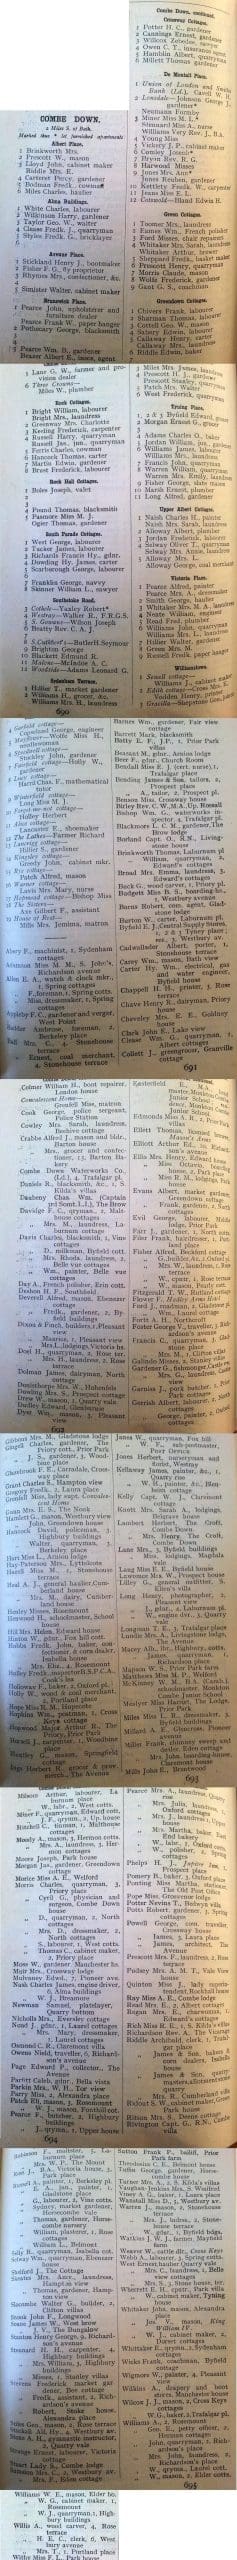 1910 Post Office Directory for Combe Down